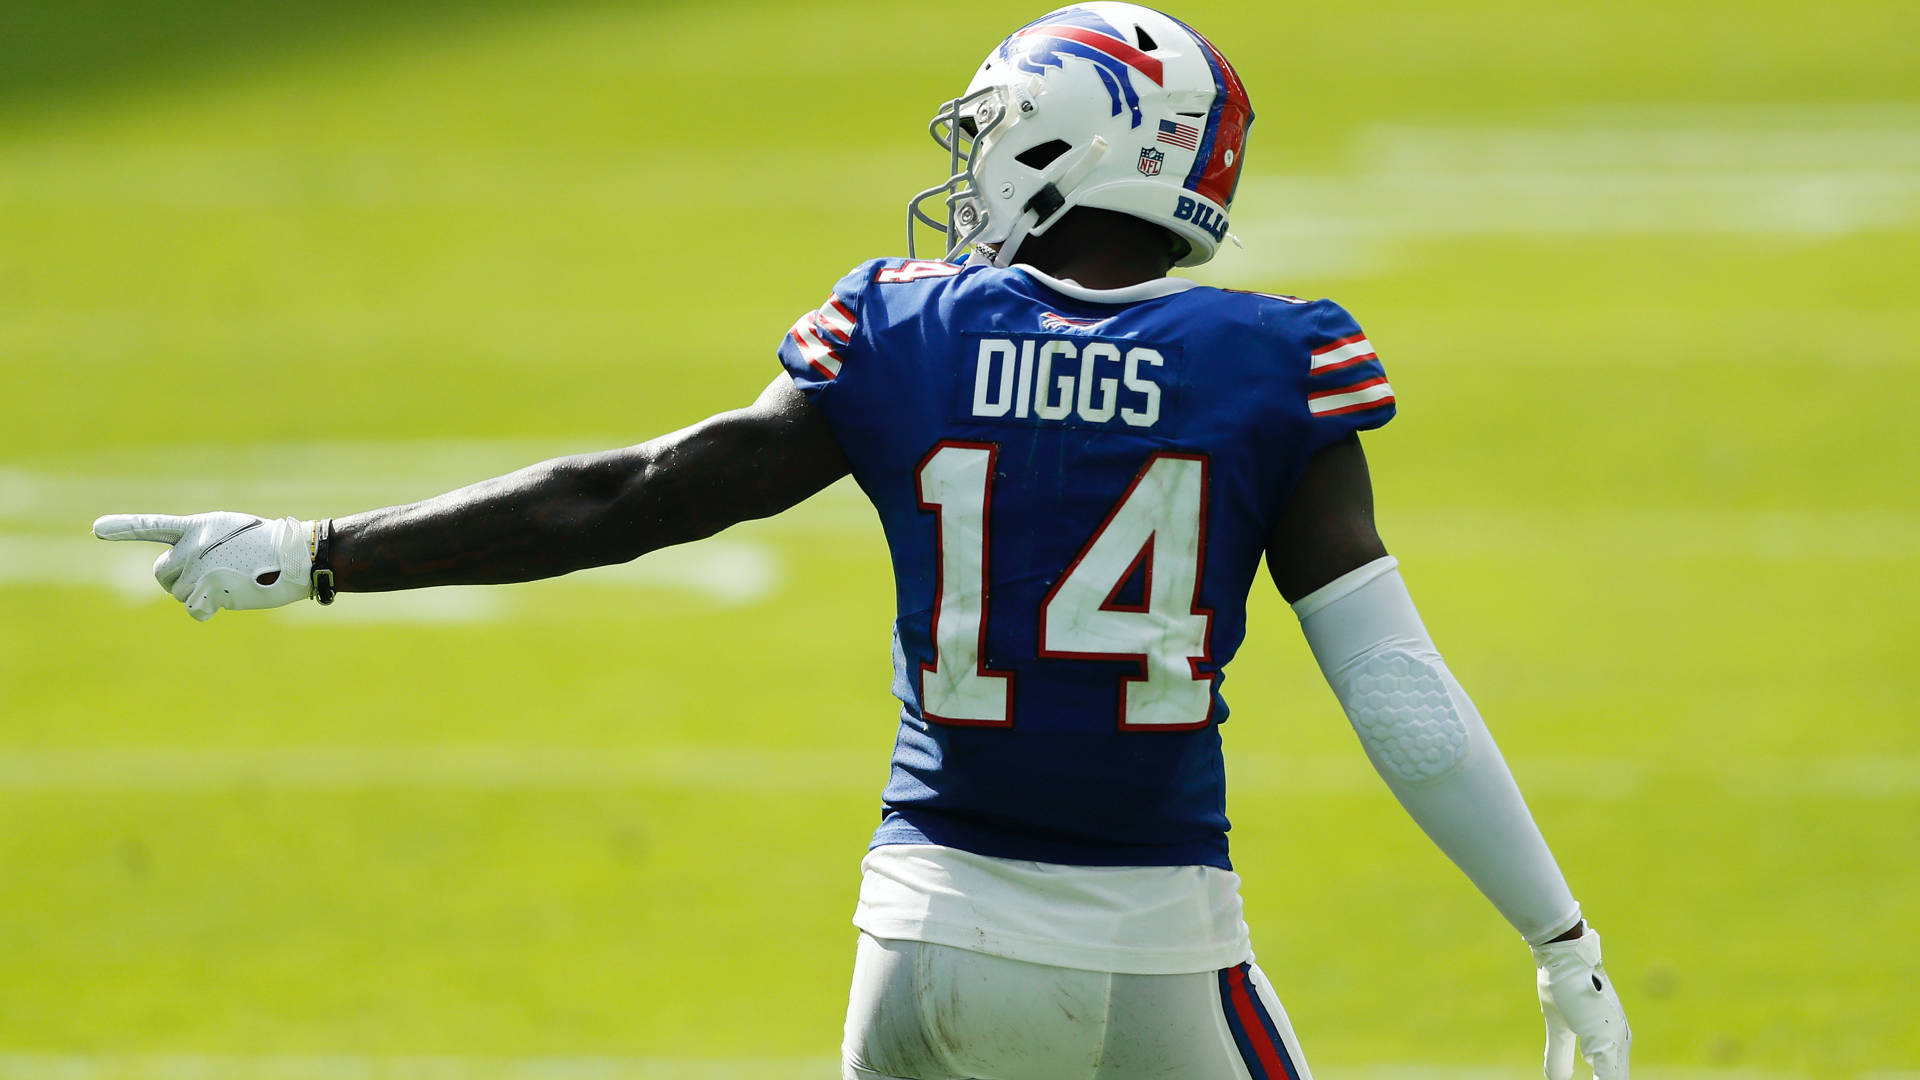 Stefon Diggs Professional Football Player Background